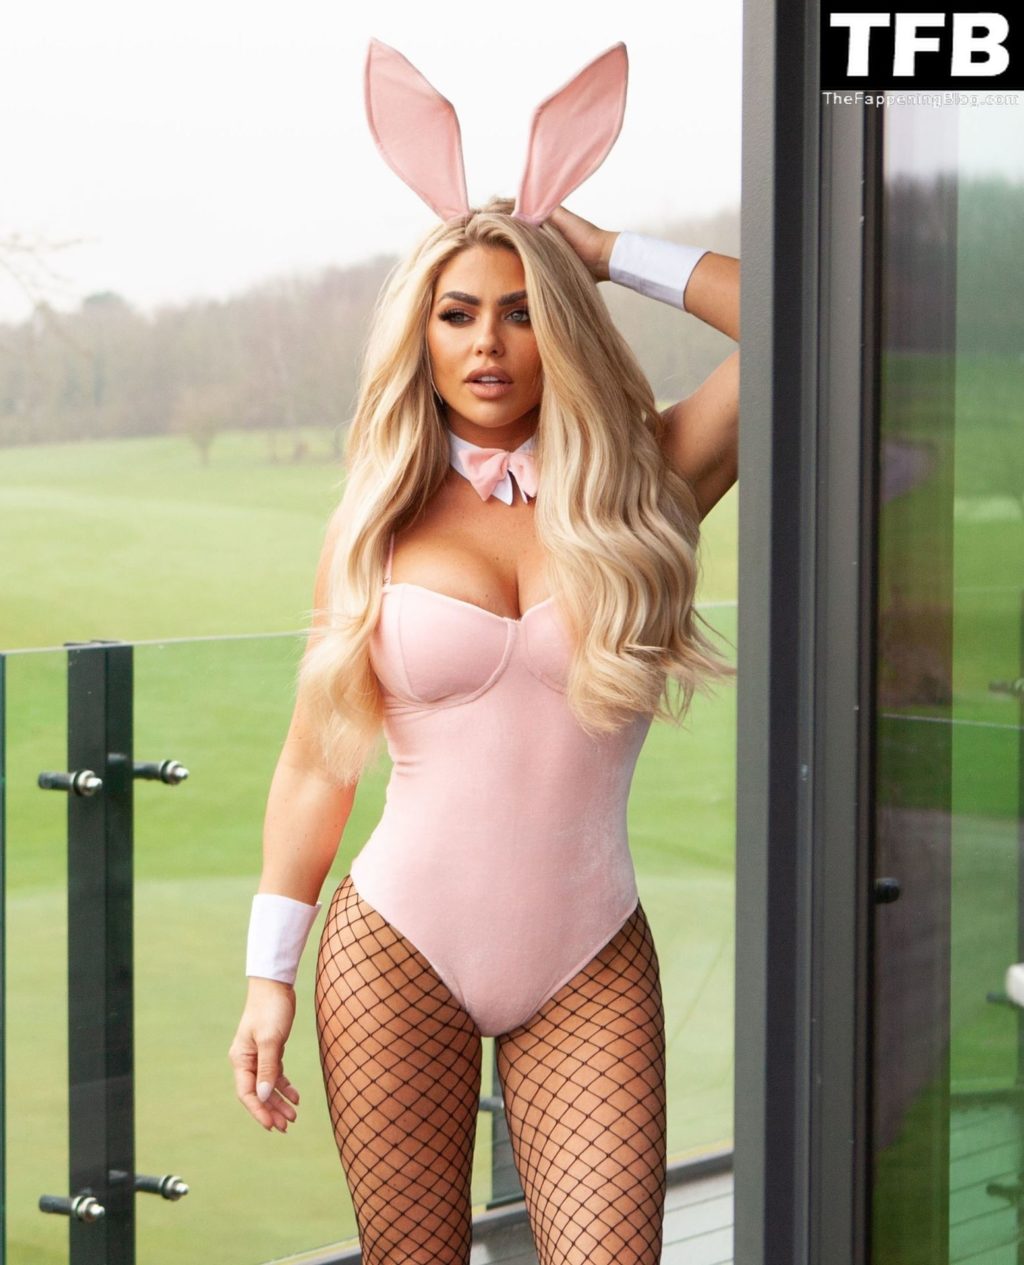 Bianca Gascoigne Shows Off Her Amazing Body in a Pink Bunny and Fishnet Tights (15 Photos)